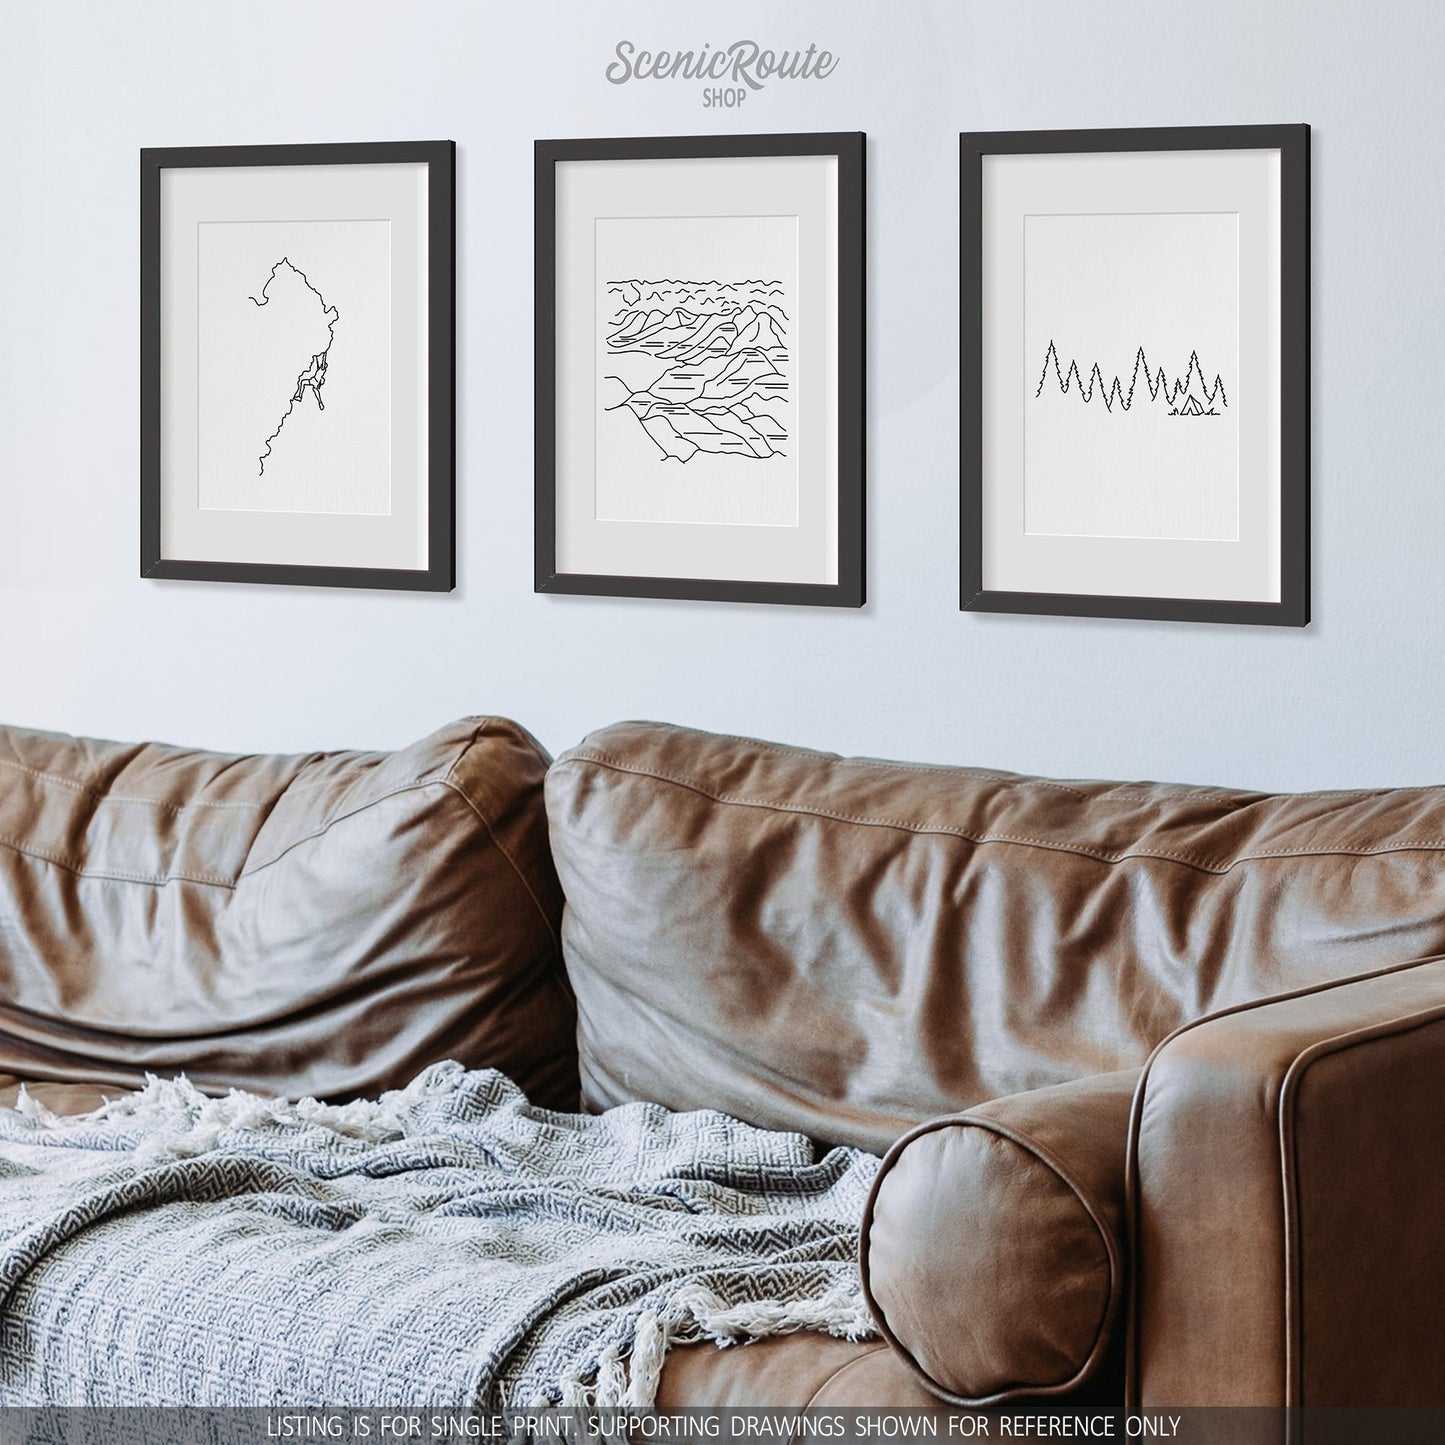 A group of three framed drawings on a wall above a couch. The line art drawings include Rock Climbing, Badlands National Park, and Camping